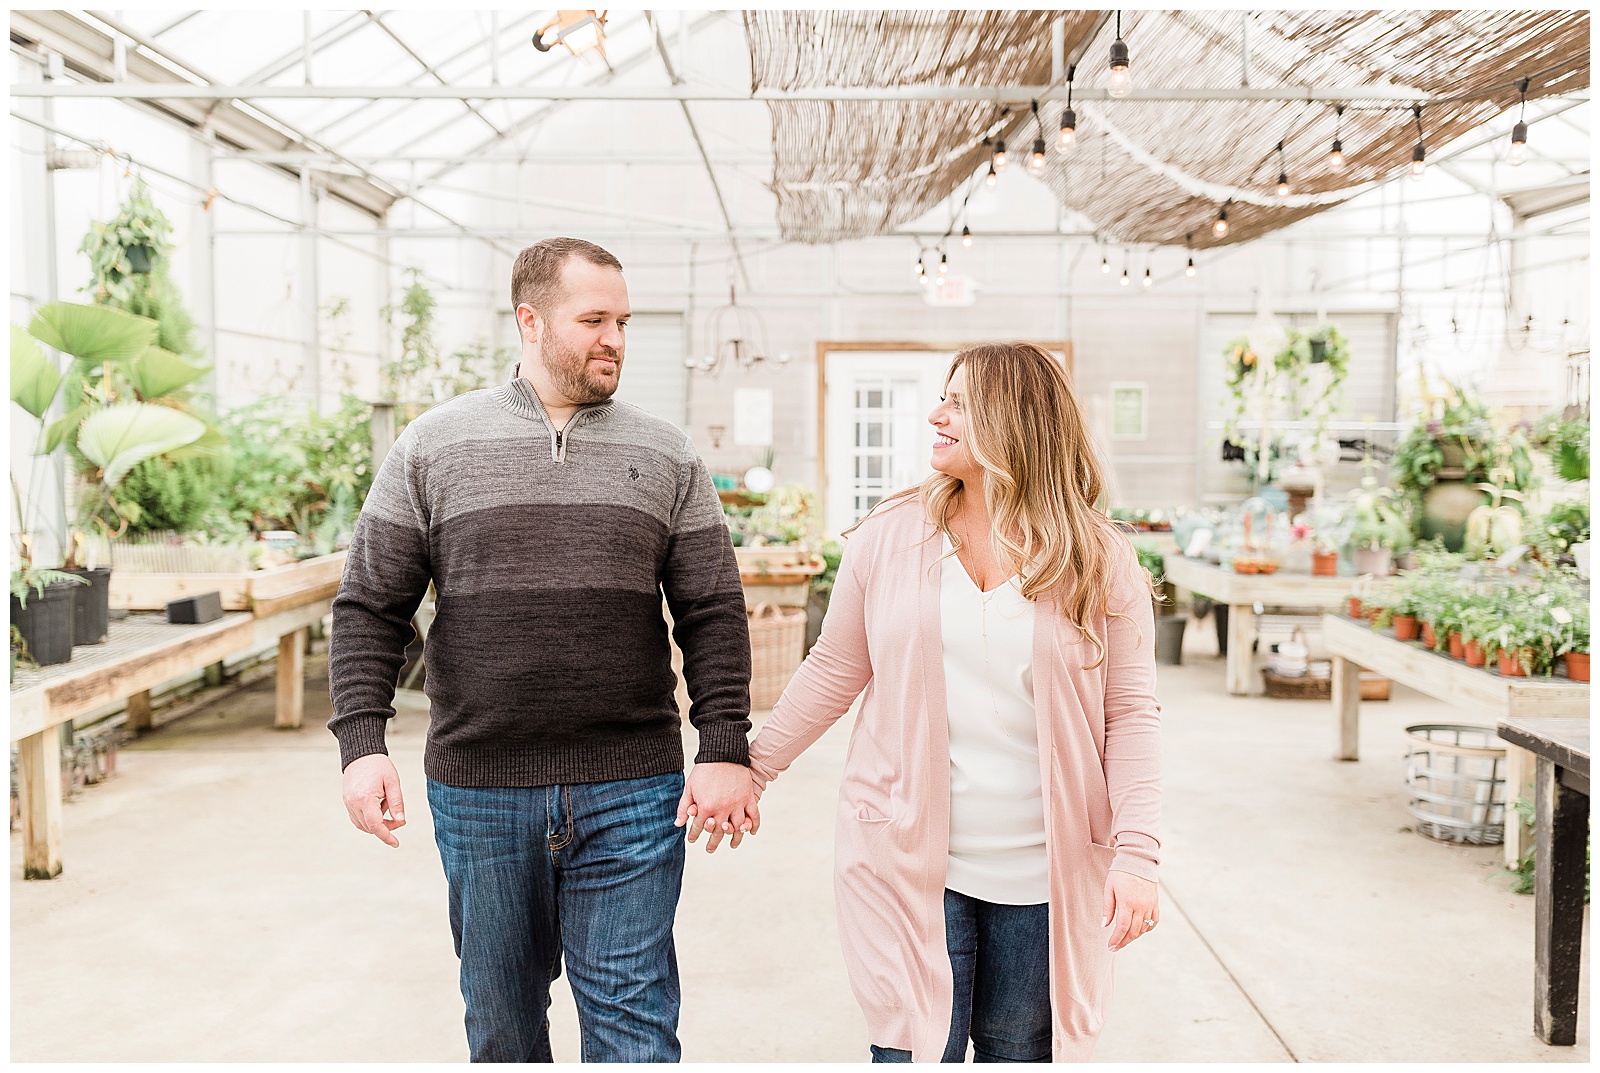 Engagement Photos in Greenhouses